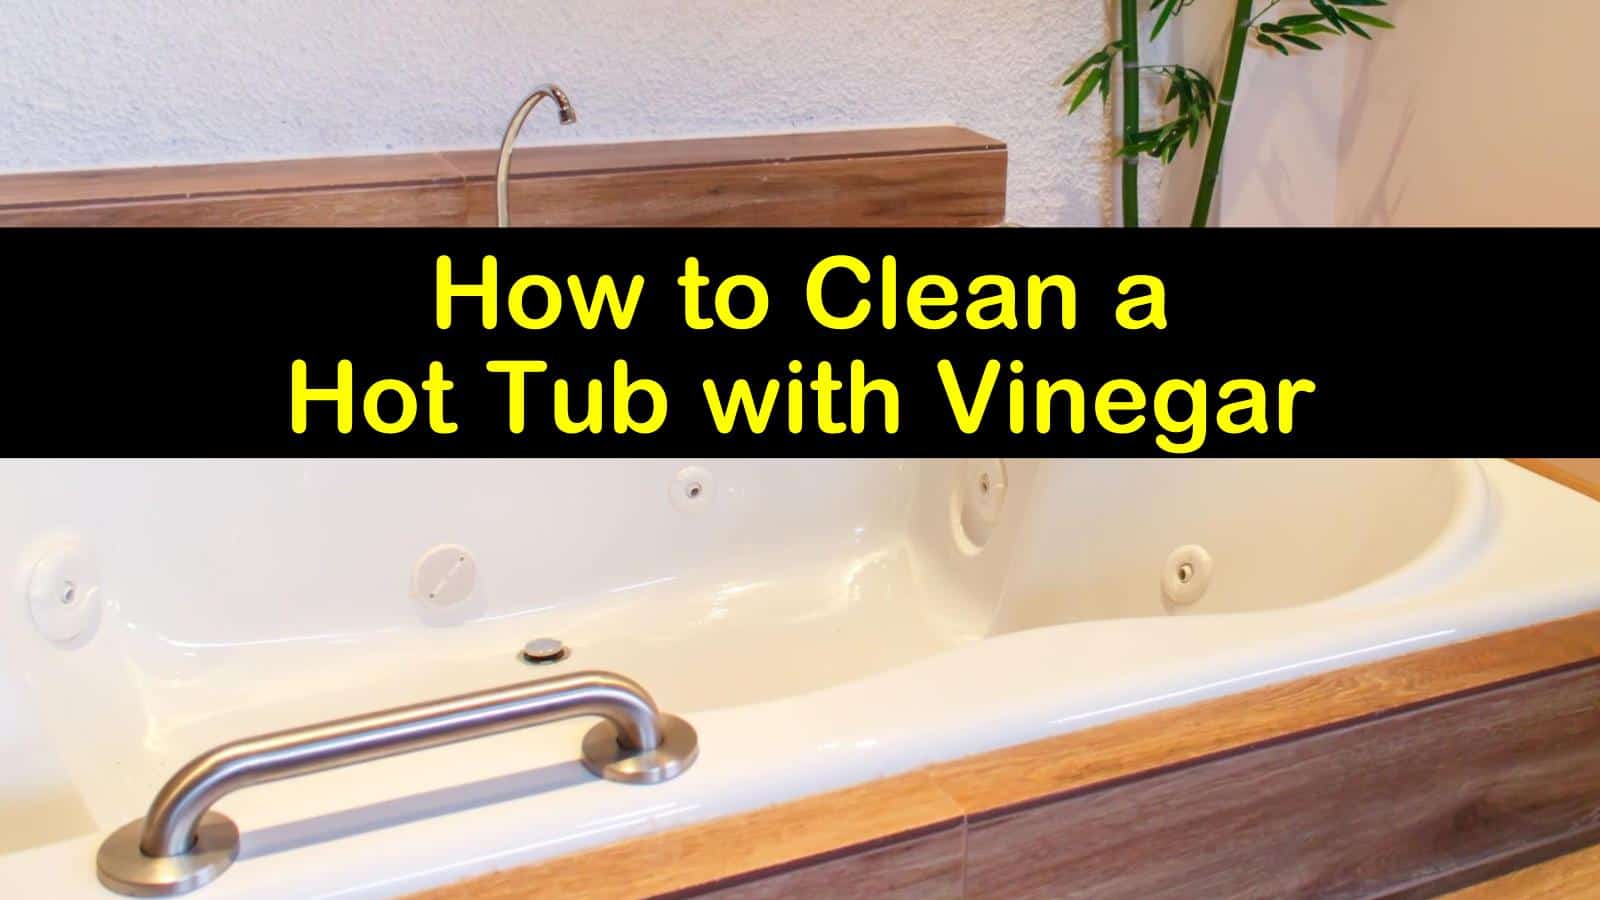 how to clean a hot tub with vinegar titleimg1